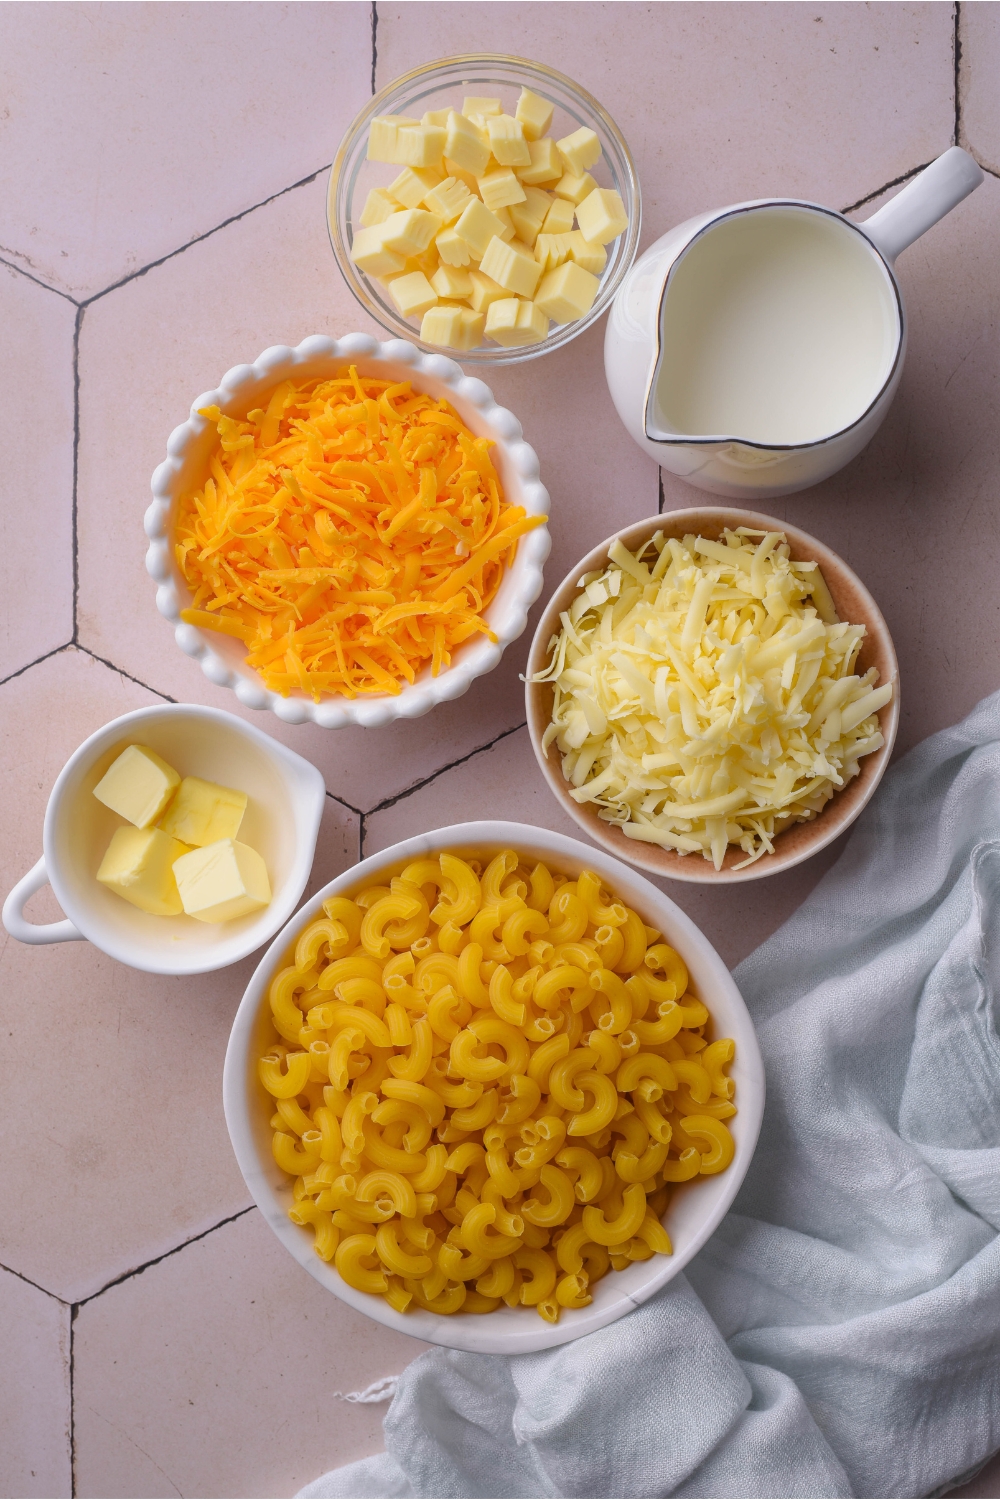 An assortment of ingredients including bowls of elbow macaroni, shredded cheese, butter cubes, and milk.